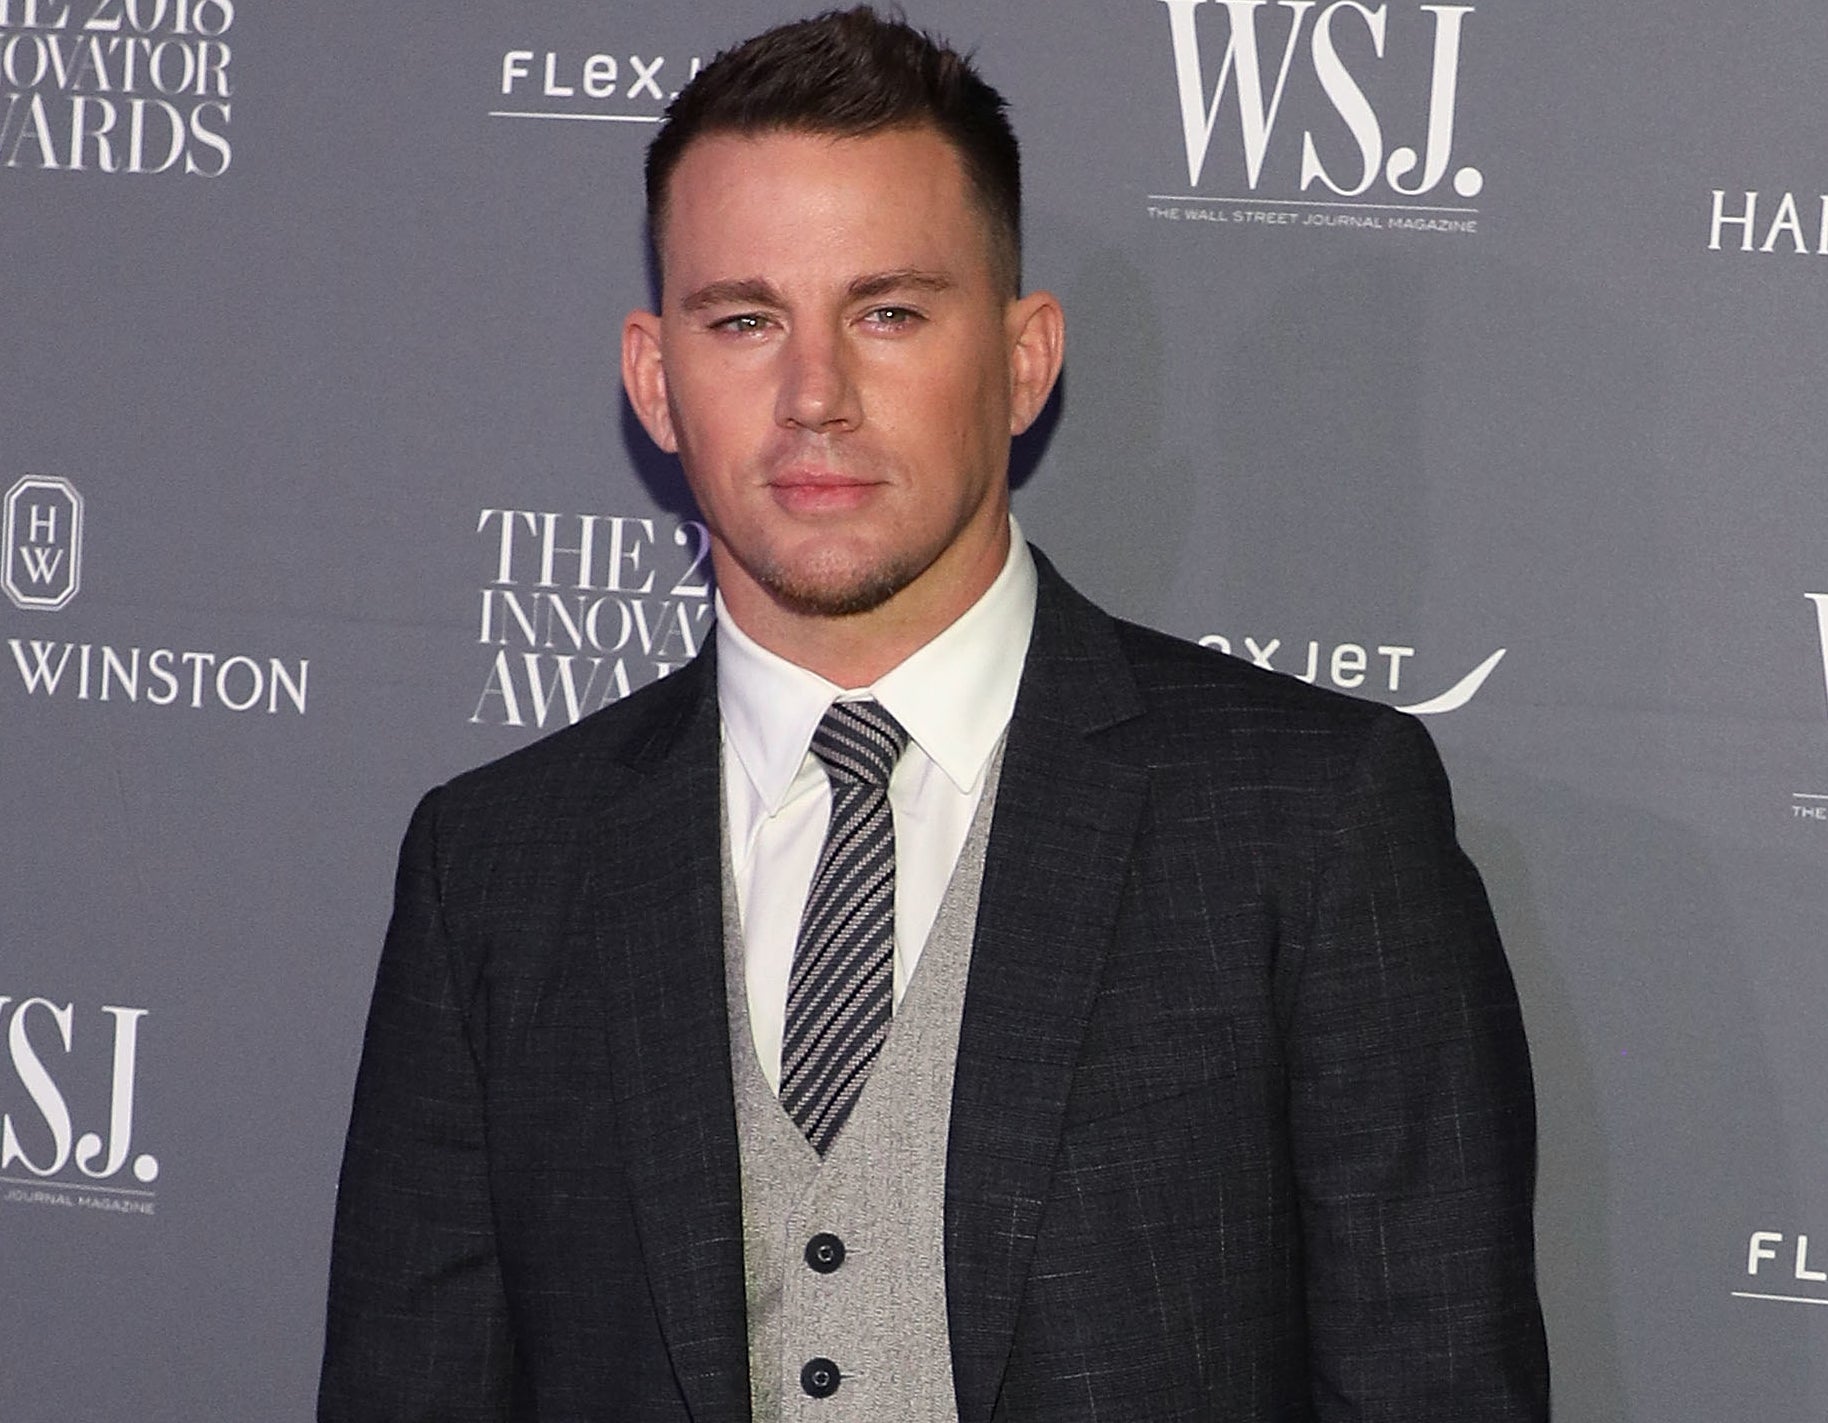 Channing looks serious in a slightly different suit